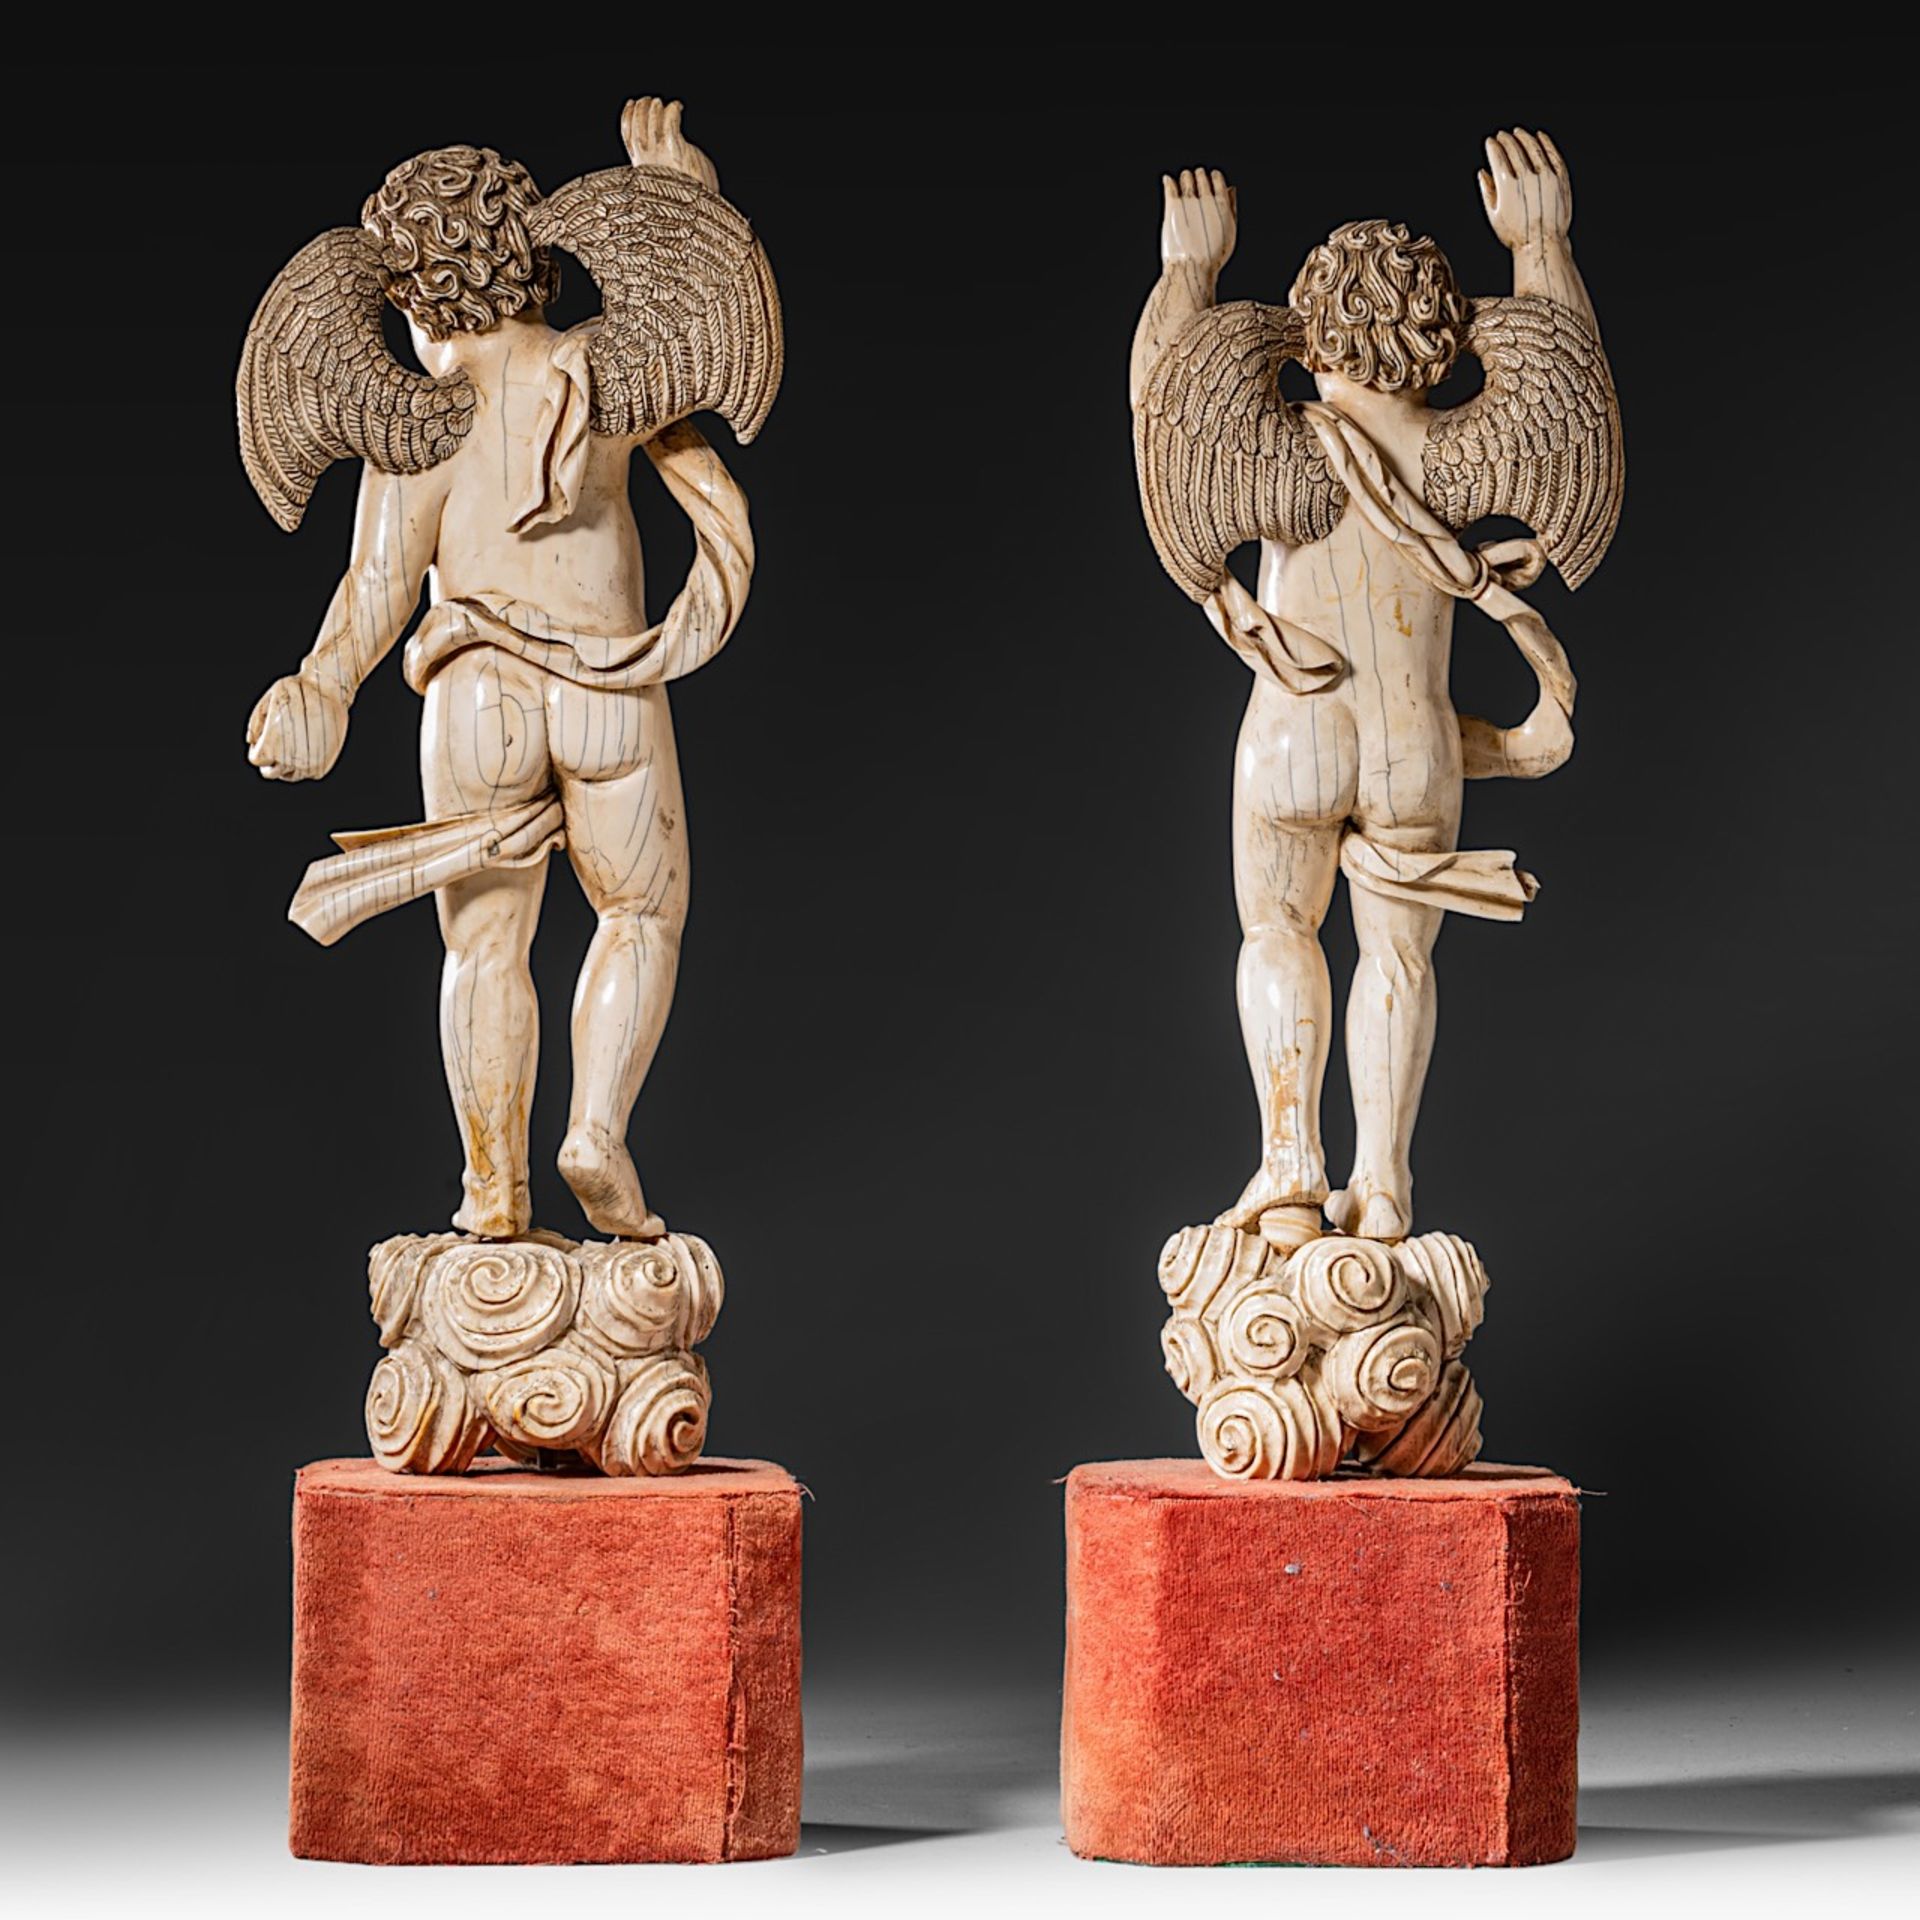 A pair of 17thC Indo-Portuguese ivory angels, H (figures) 38,5 cm - total H 49 cm / 2862 - 2968 g (+ - Image 5 of 7